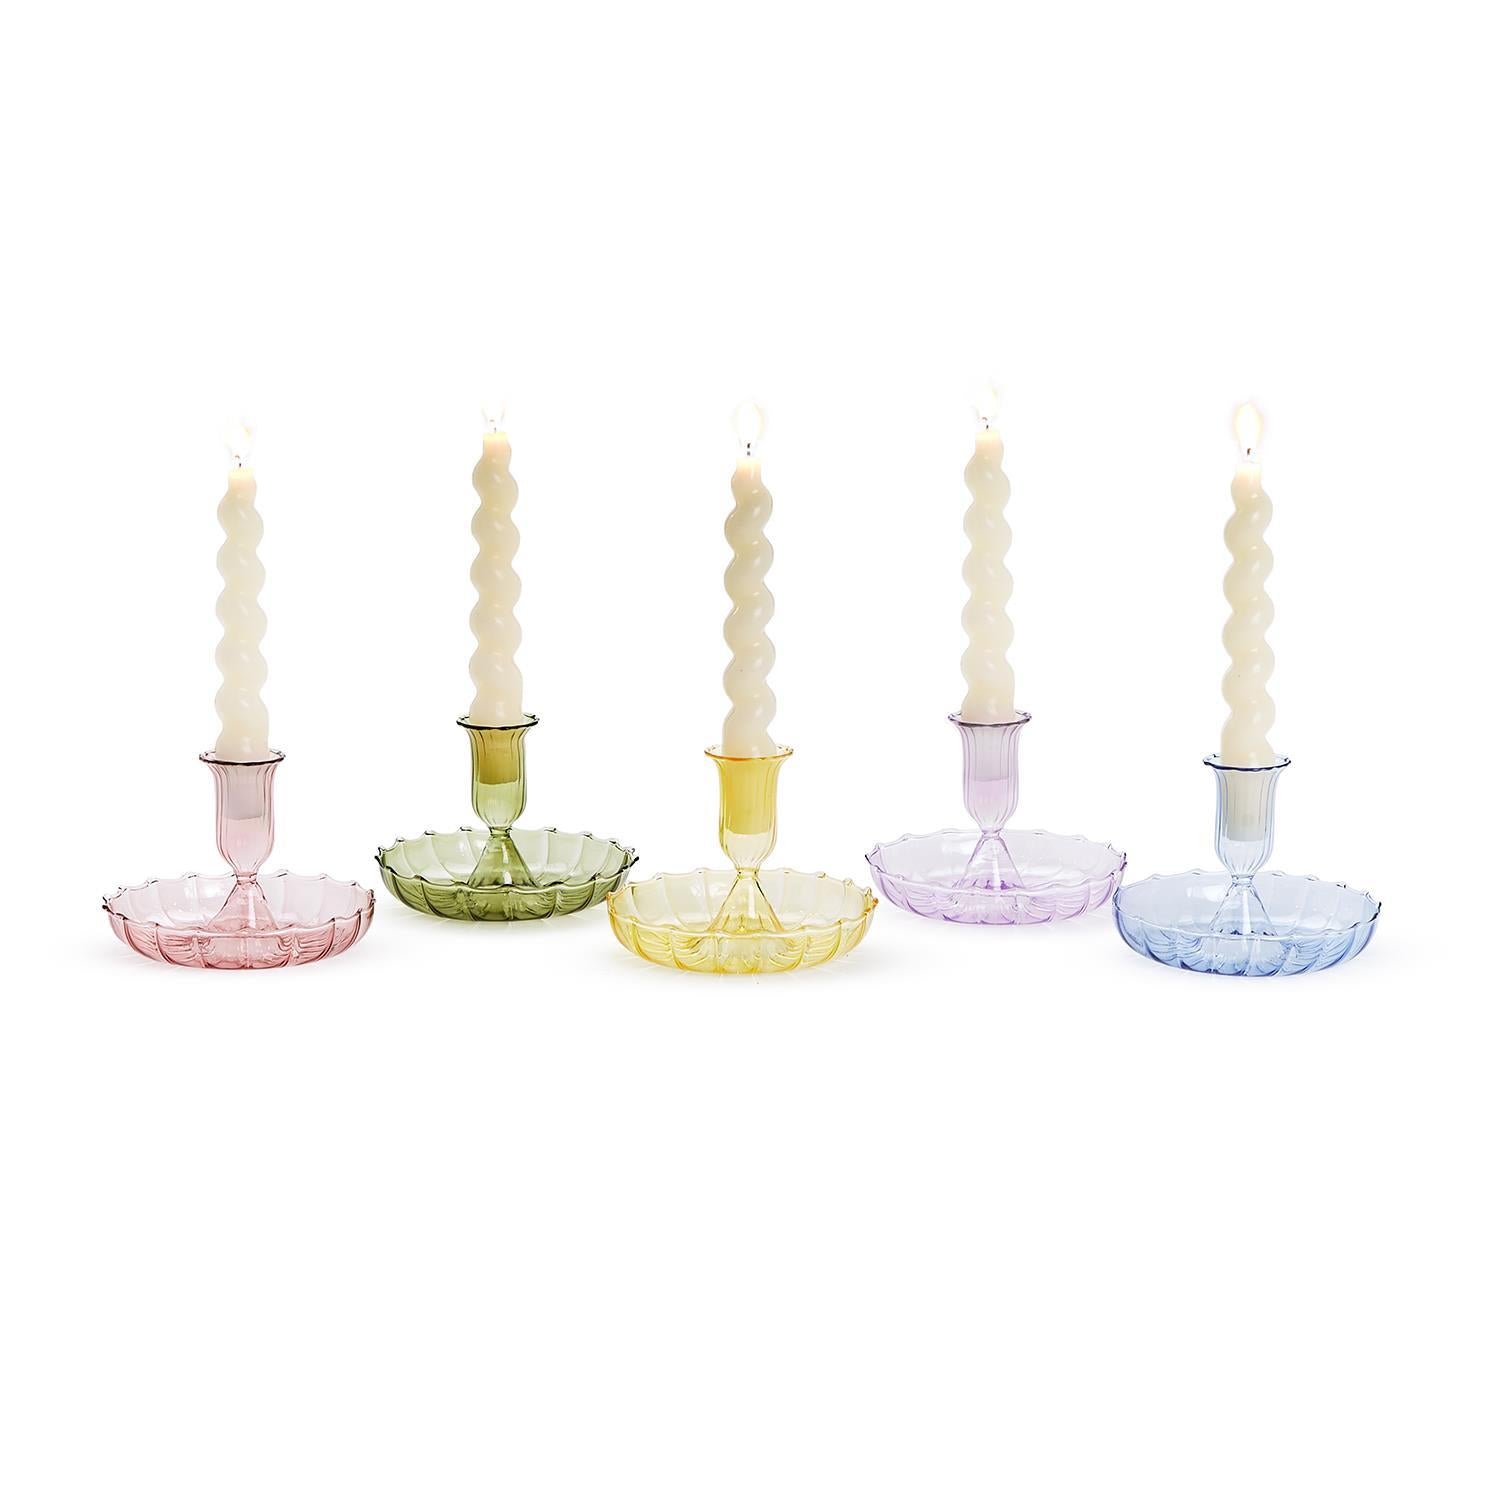 Hand-Blown Glass Taper Candlestick Candleholder - 5 colors - The Preppy Bunny